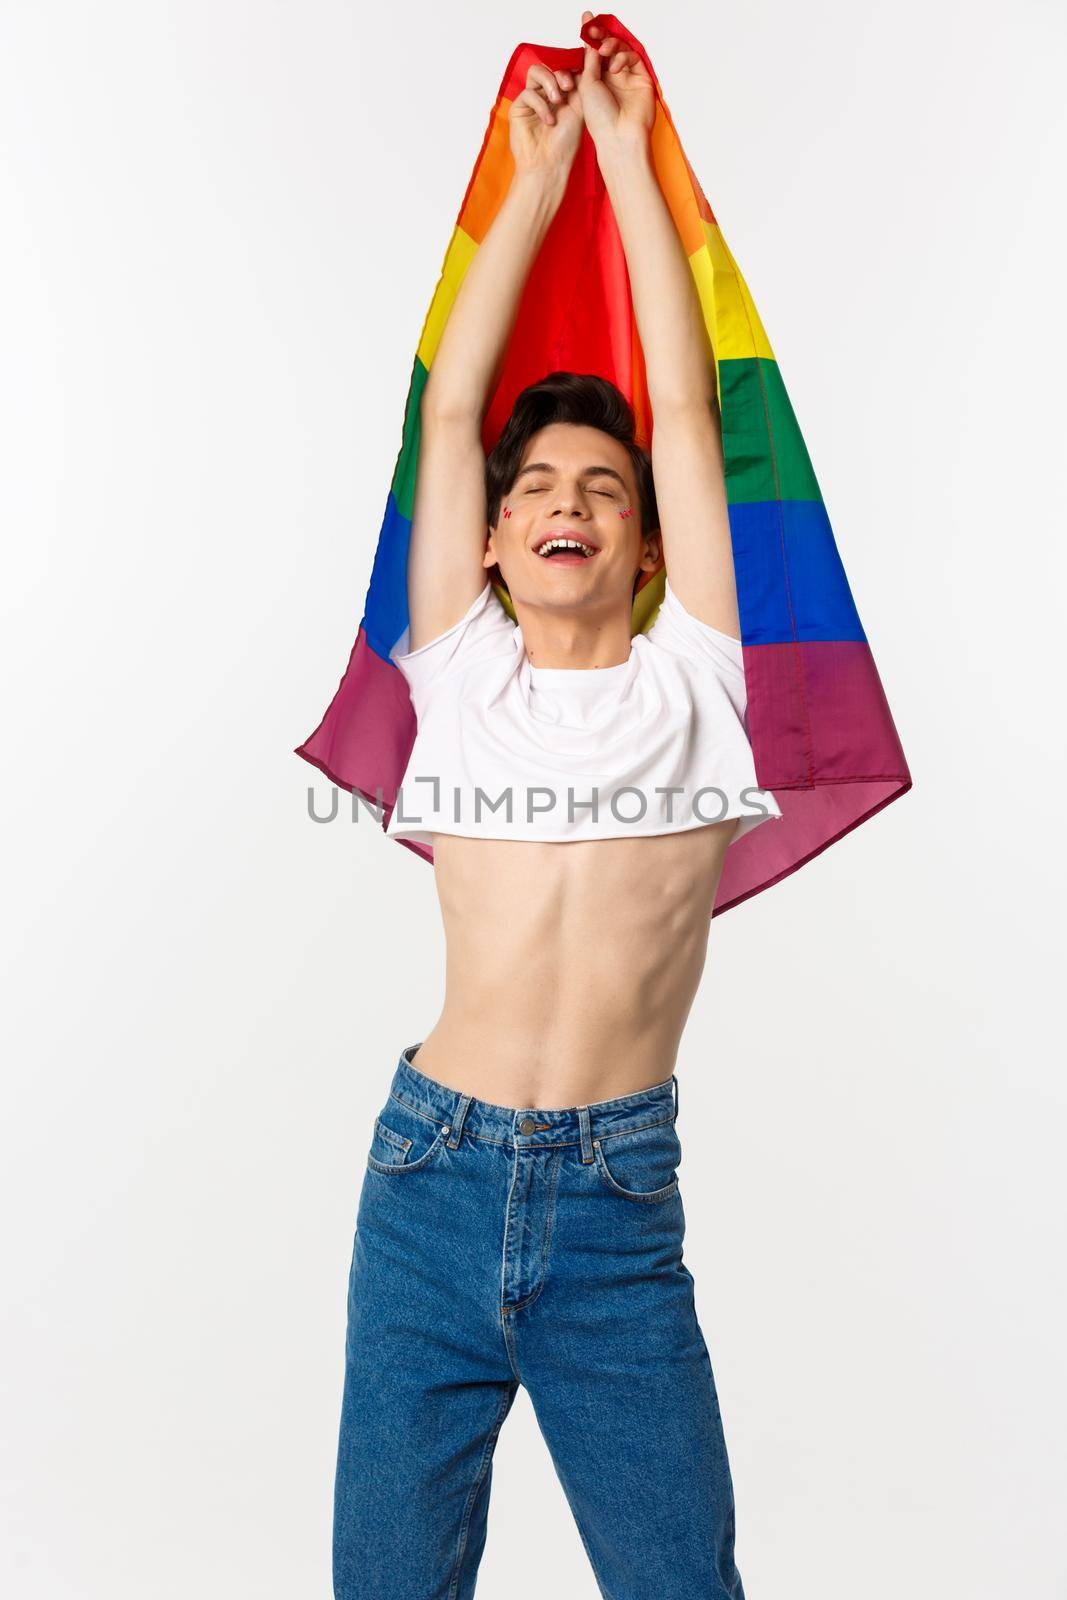 Vertical view of proud and happy gay man raising lgbtq rainbow flag, smiling with relieved emotion, wearing crop top with jeans, white background by Benzoix